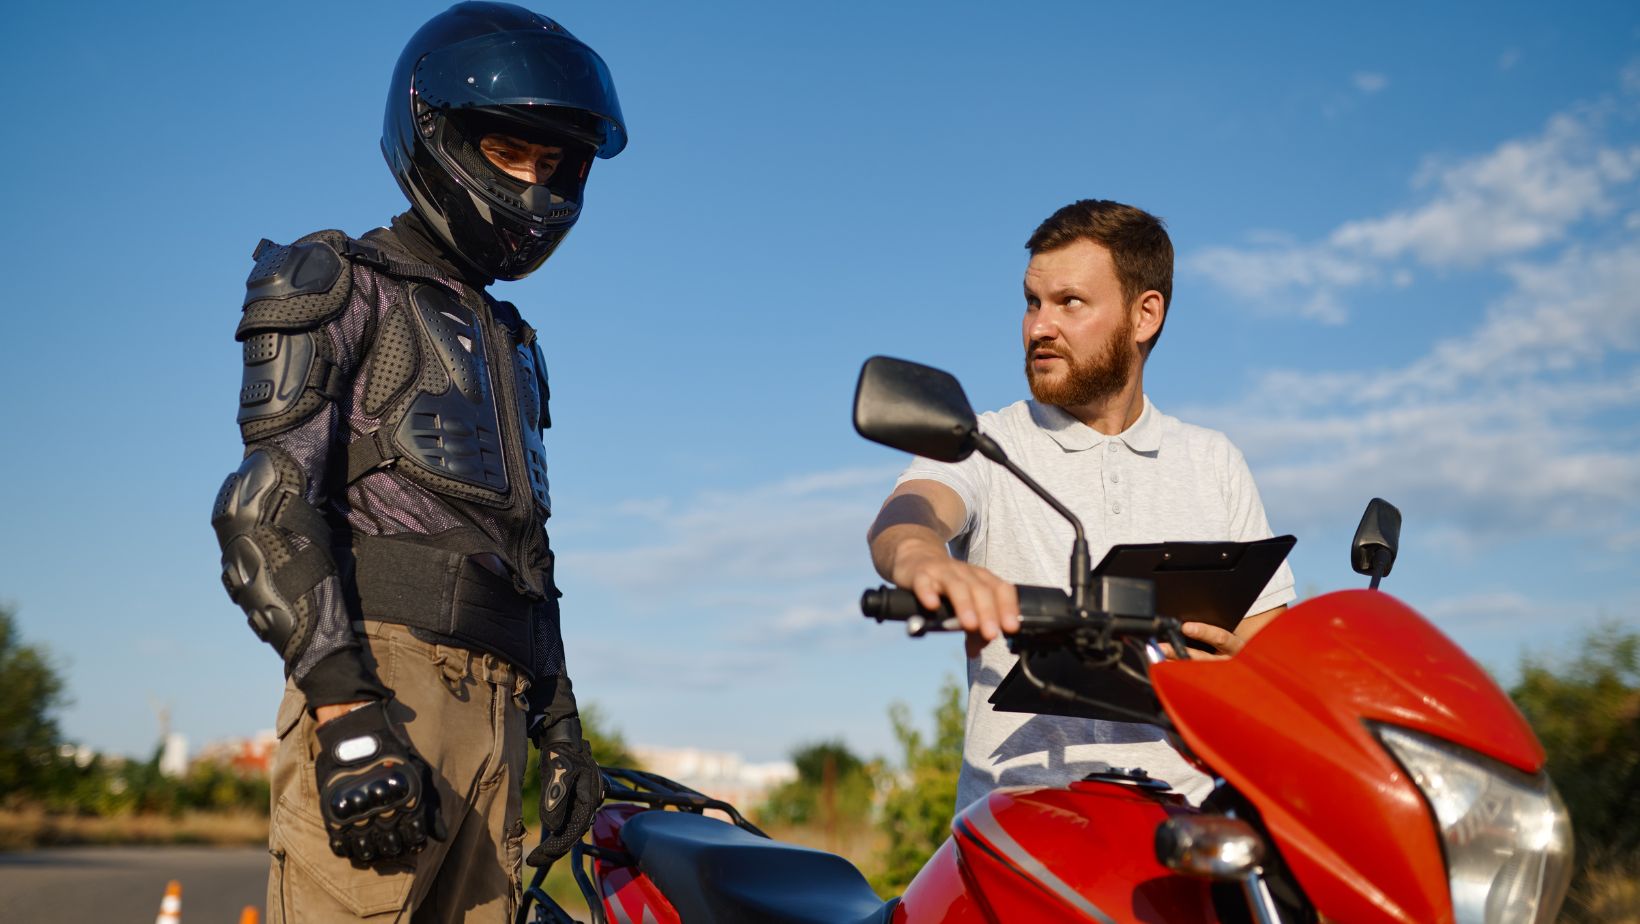 San Diego motorcycle riding lessons